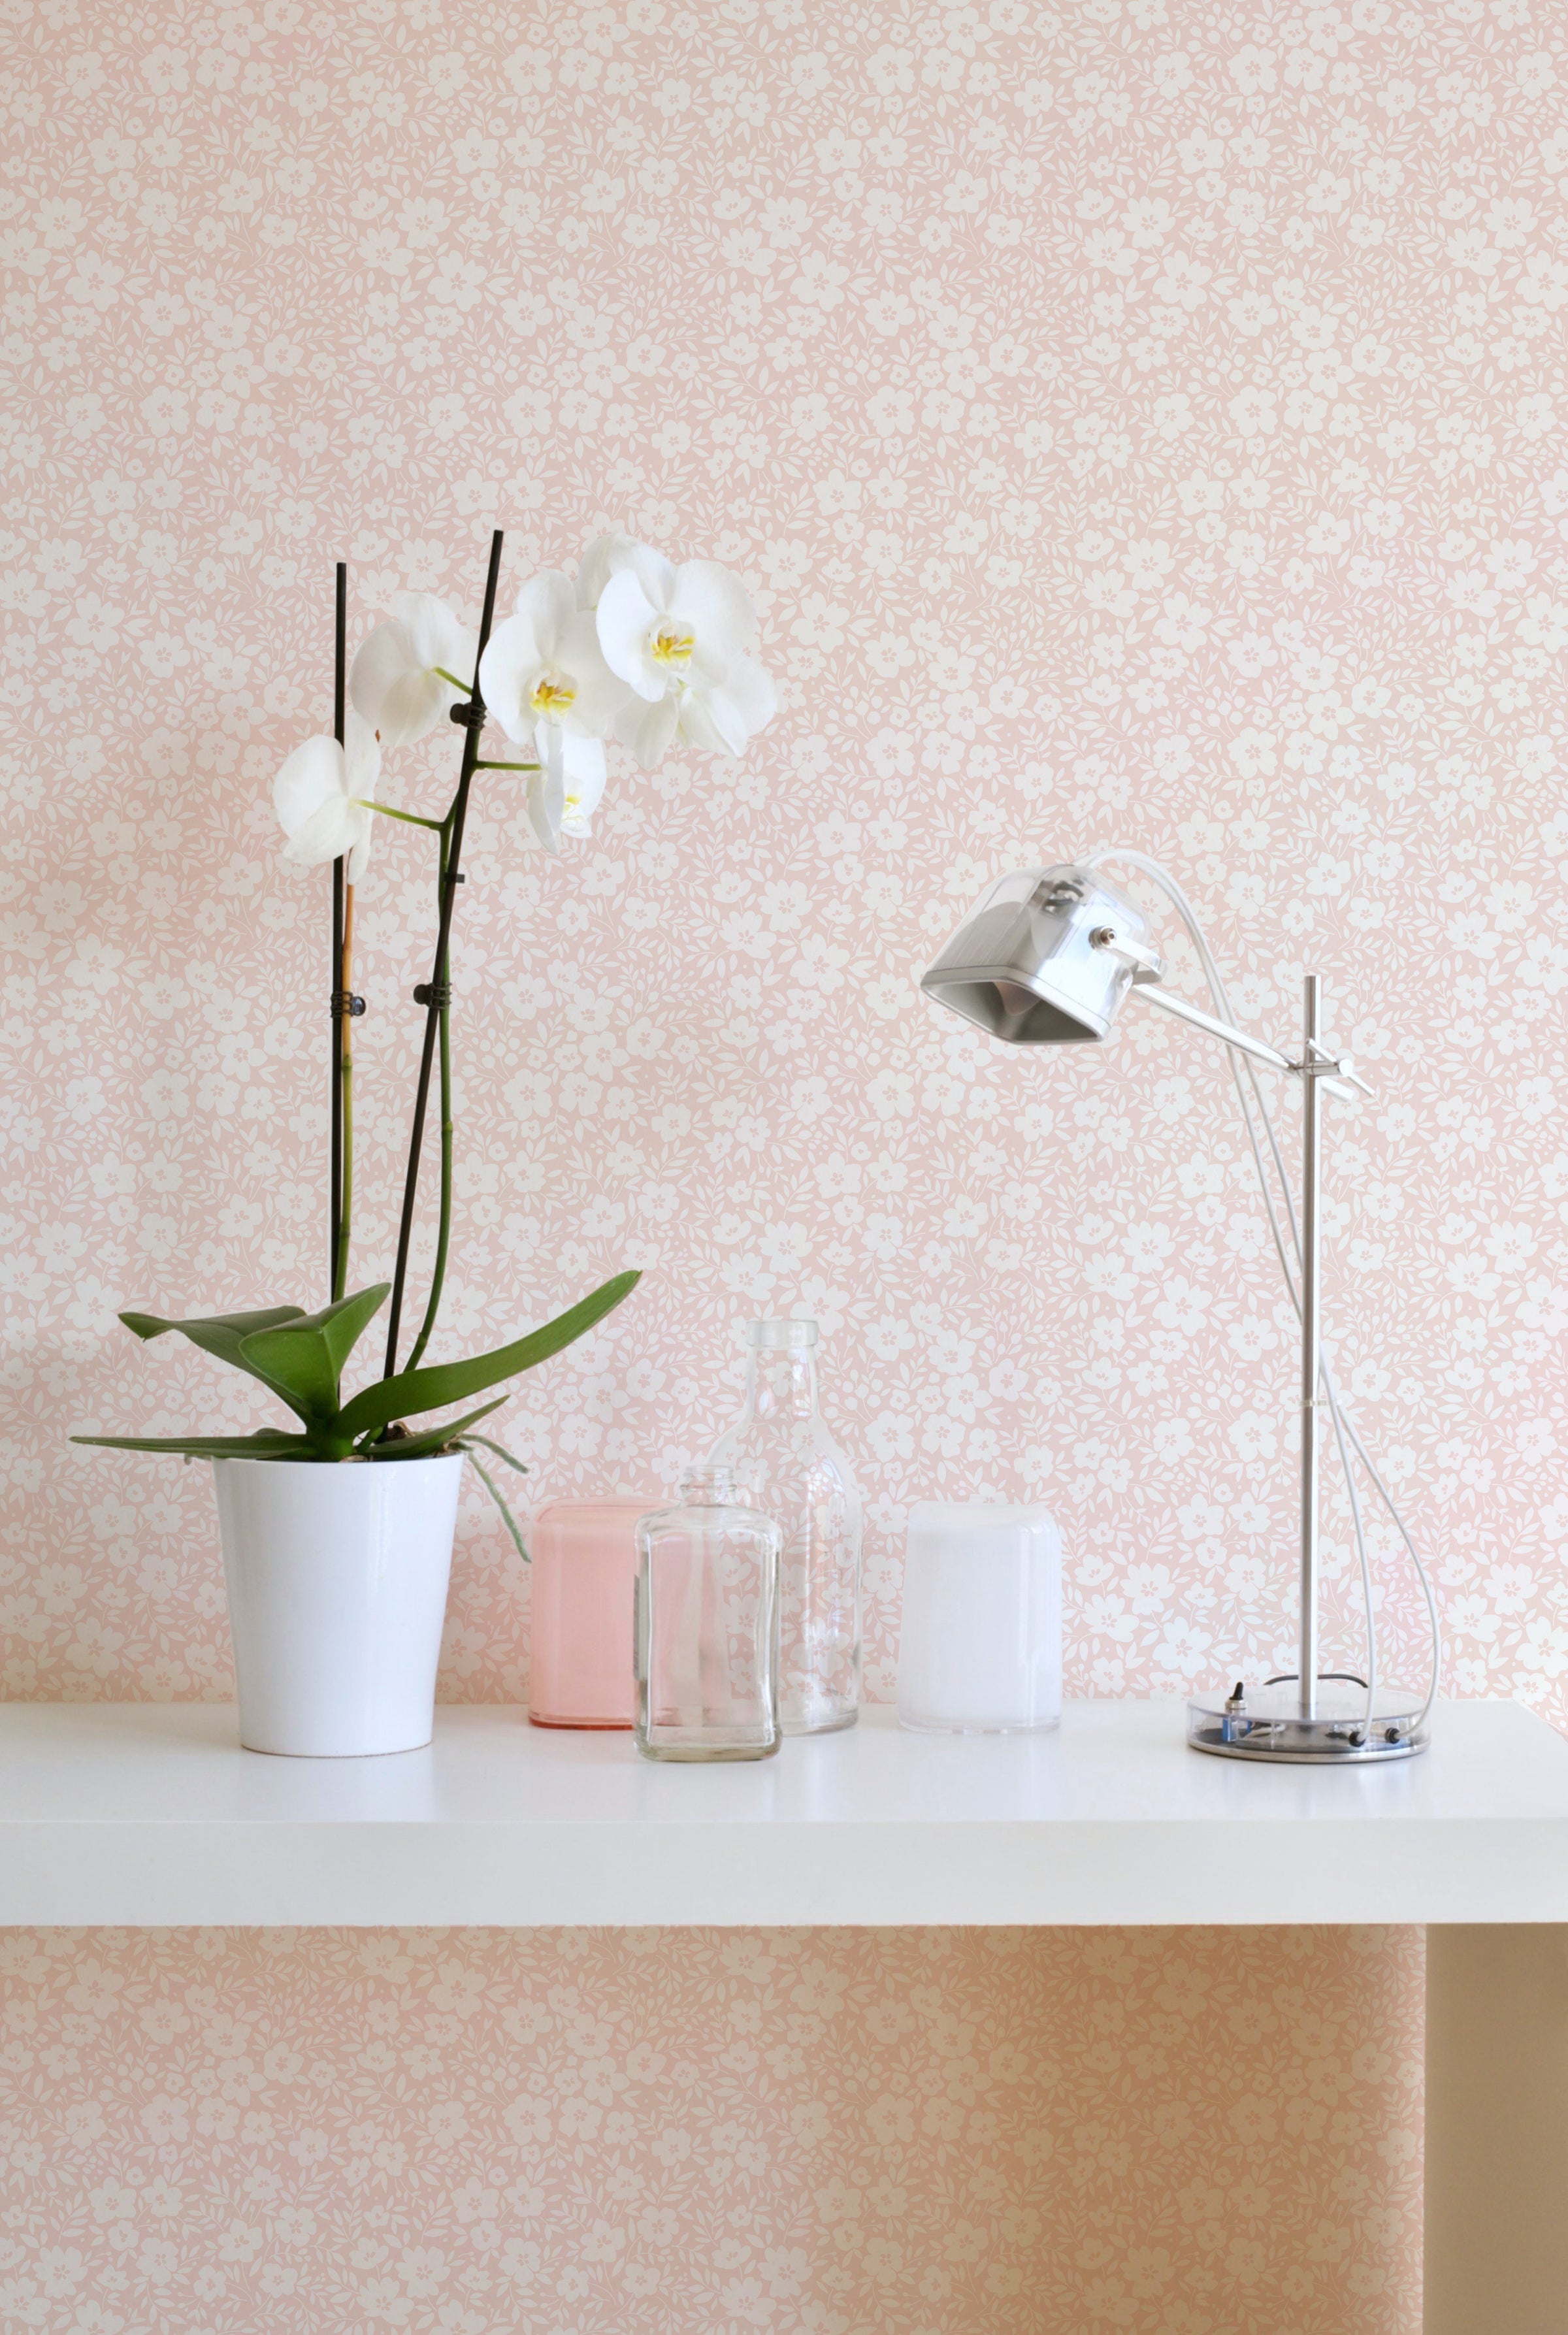 A section of 'Flower Power' wallpaper in a soft champagne color with white floral patterns, applied to a wall behind a shelf with a potted orchid, clear glass bottles, and candles